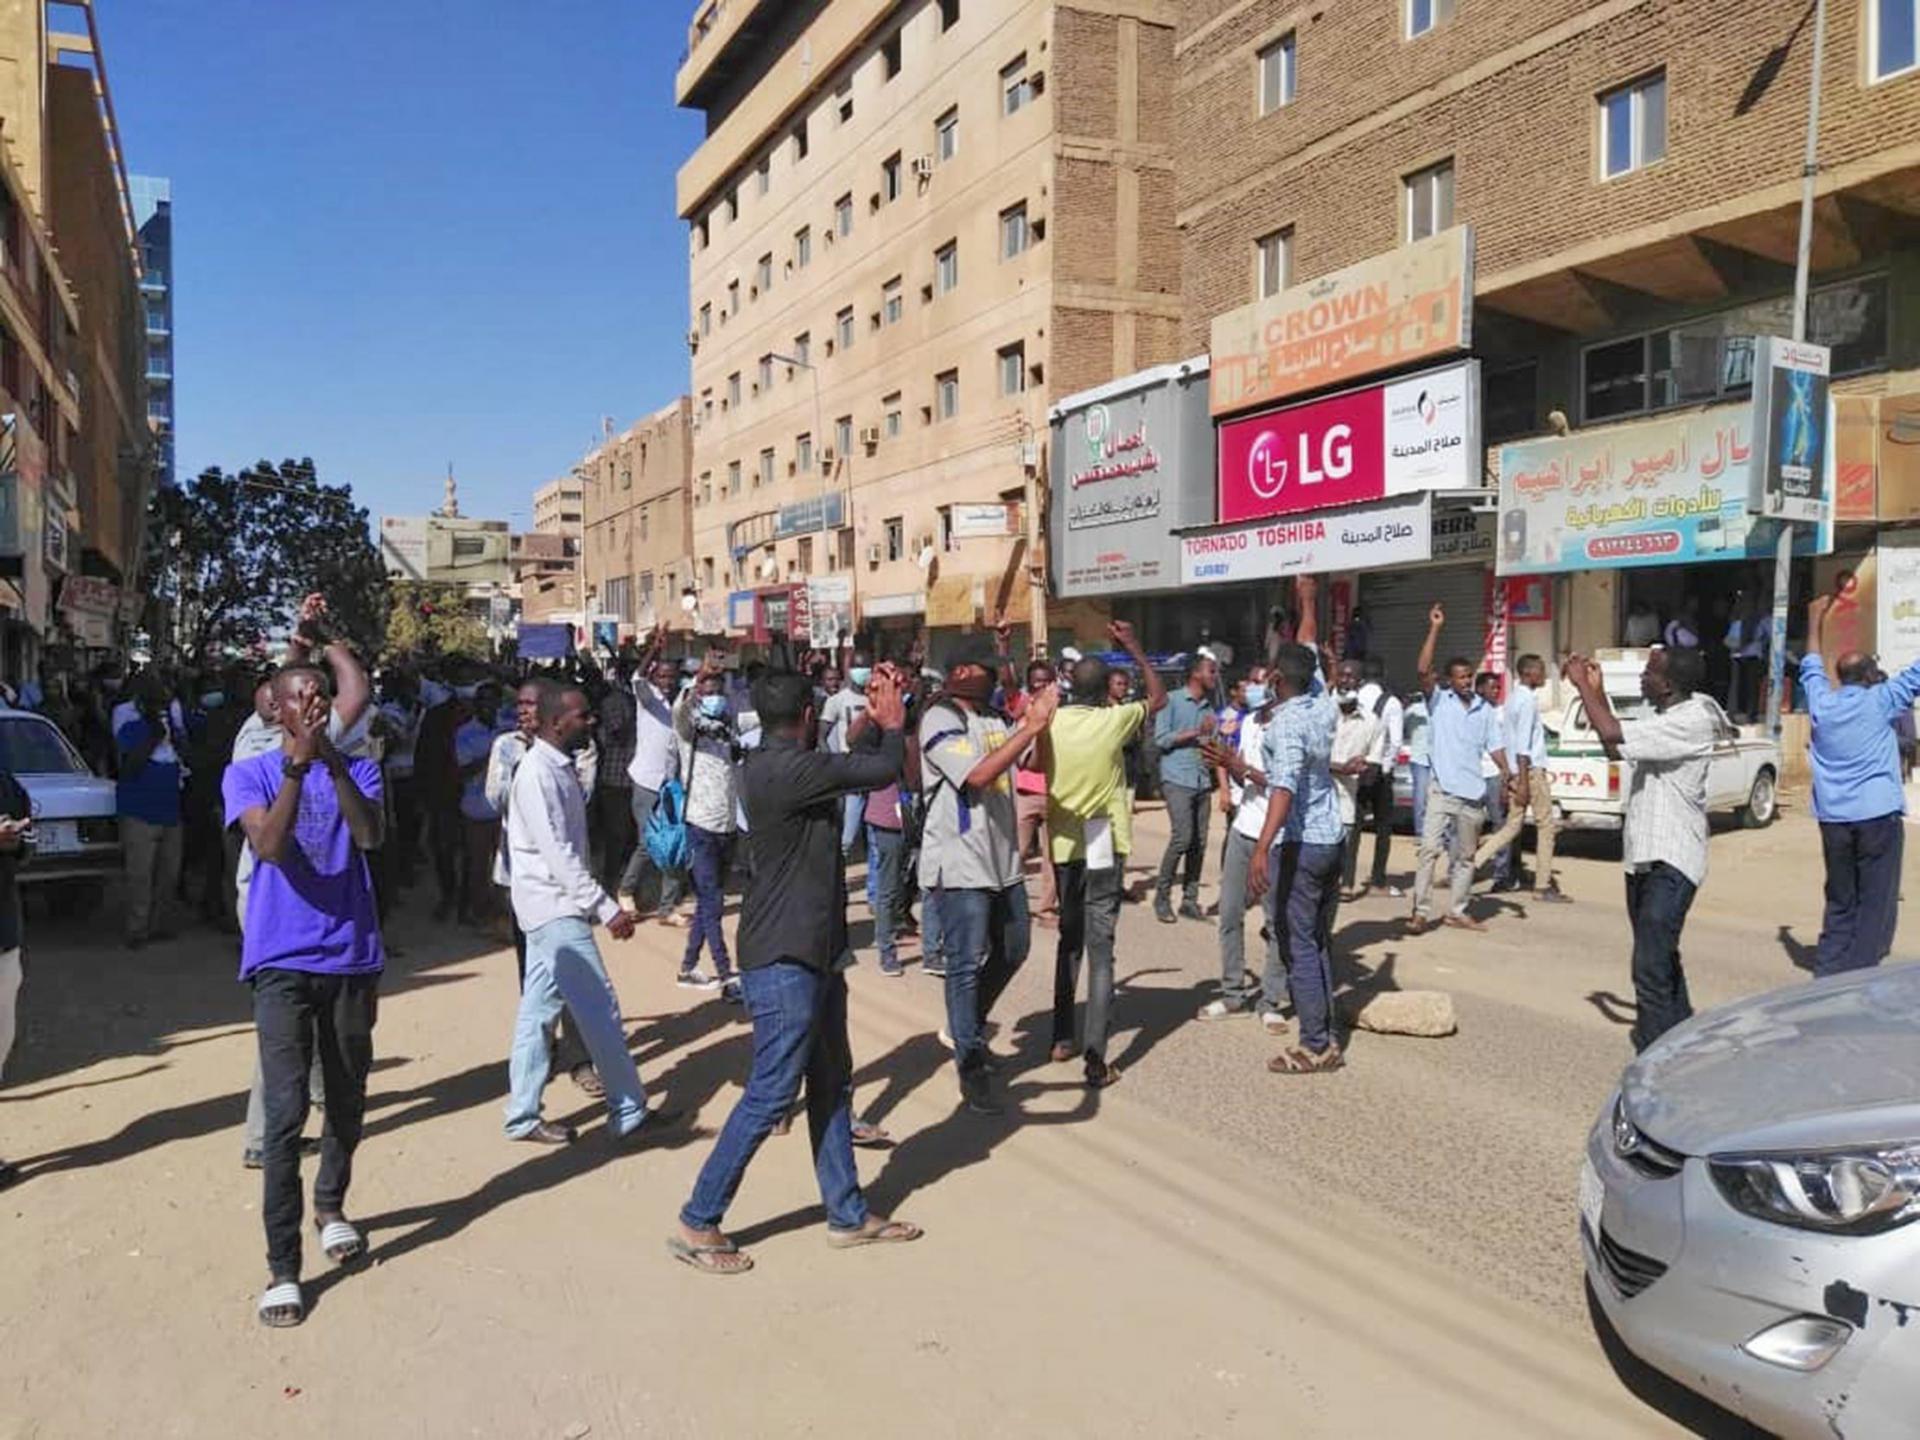 Sudanese protesters chant slogans during an anti-government demonstration in the capital Khartoum on January 6, 2019.